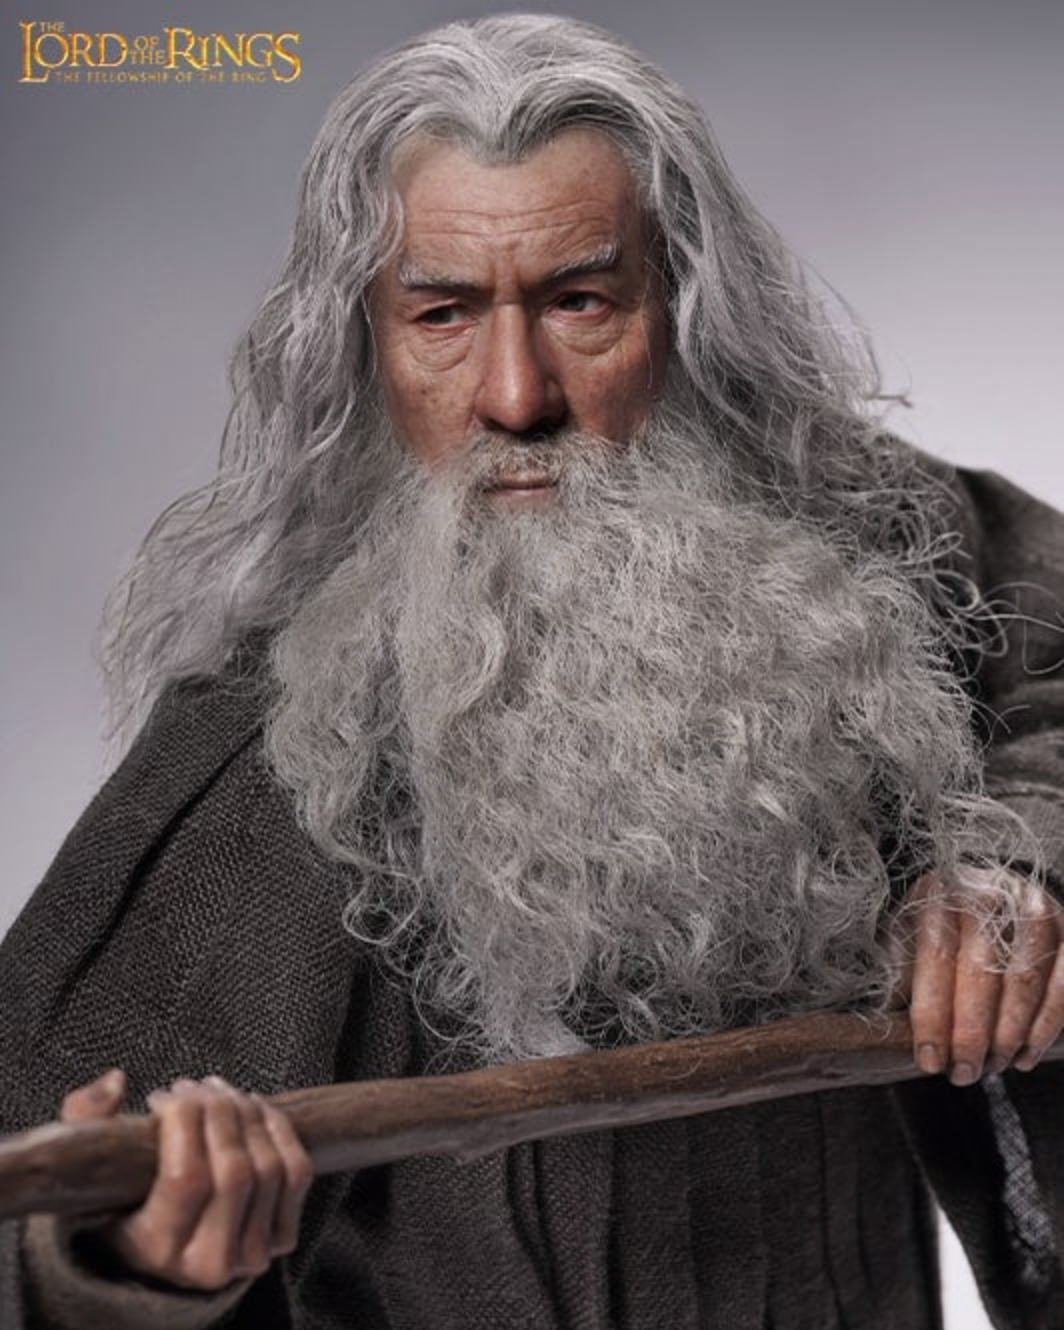 Who is More Powerful in Lord of the Rings, Gandalf or Smaug?